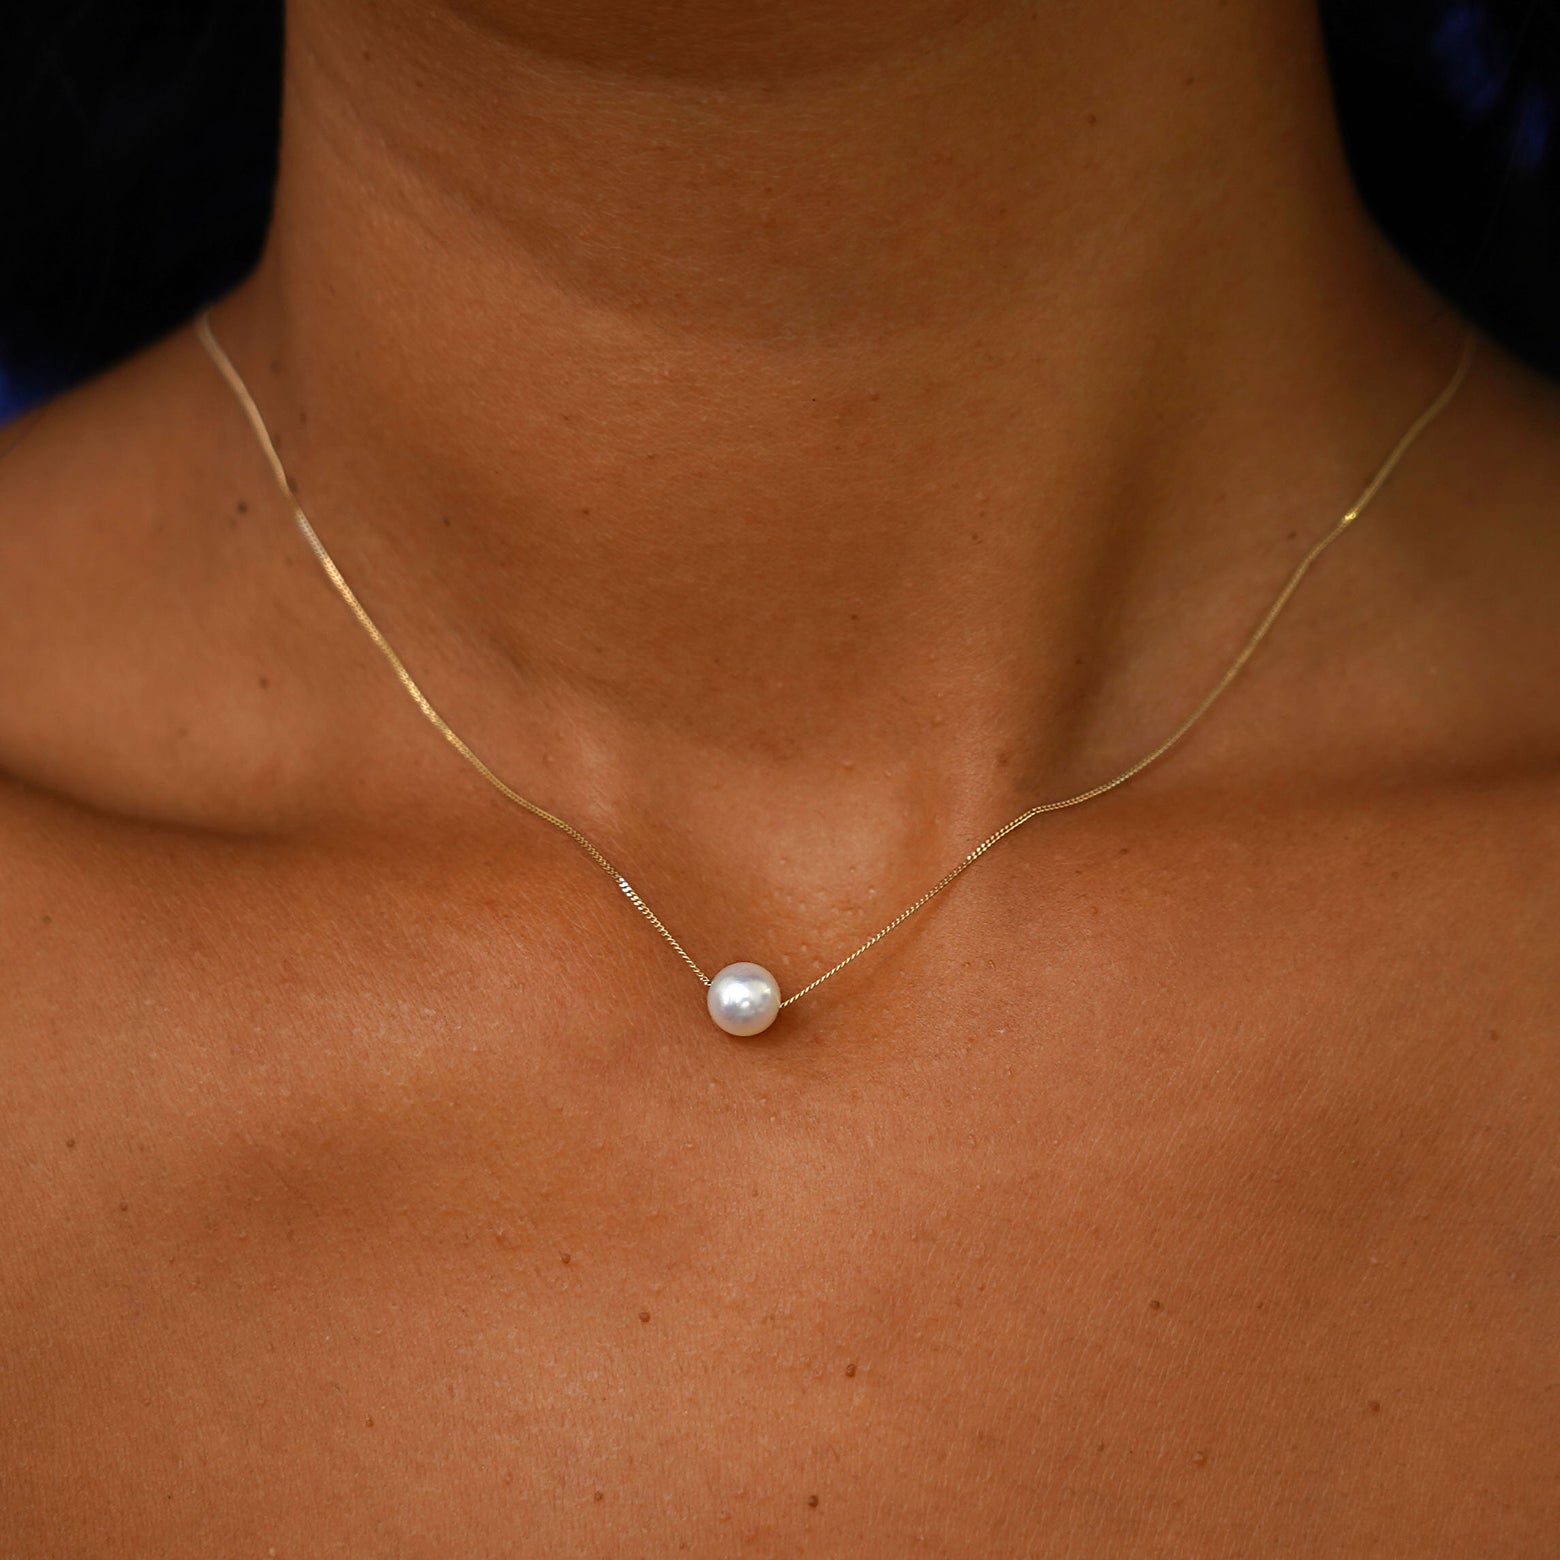 A model's neck wearing a yellow gold Pearl Slide Necklace with a 6mm pearl